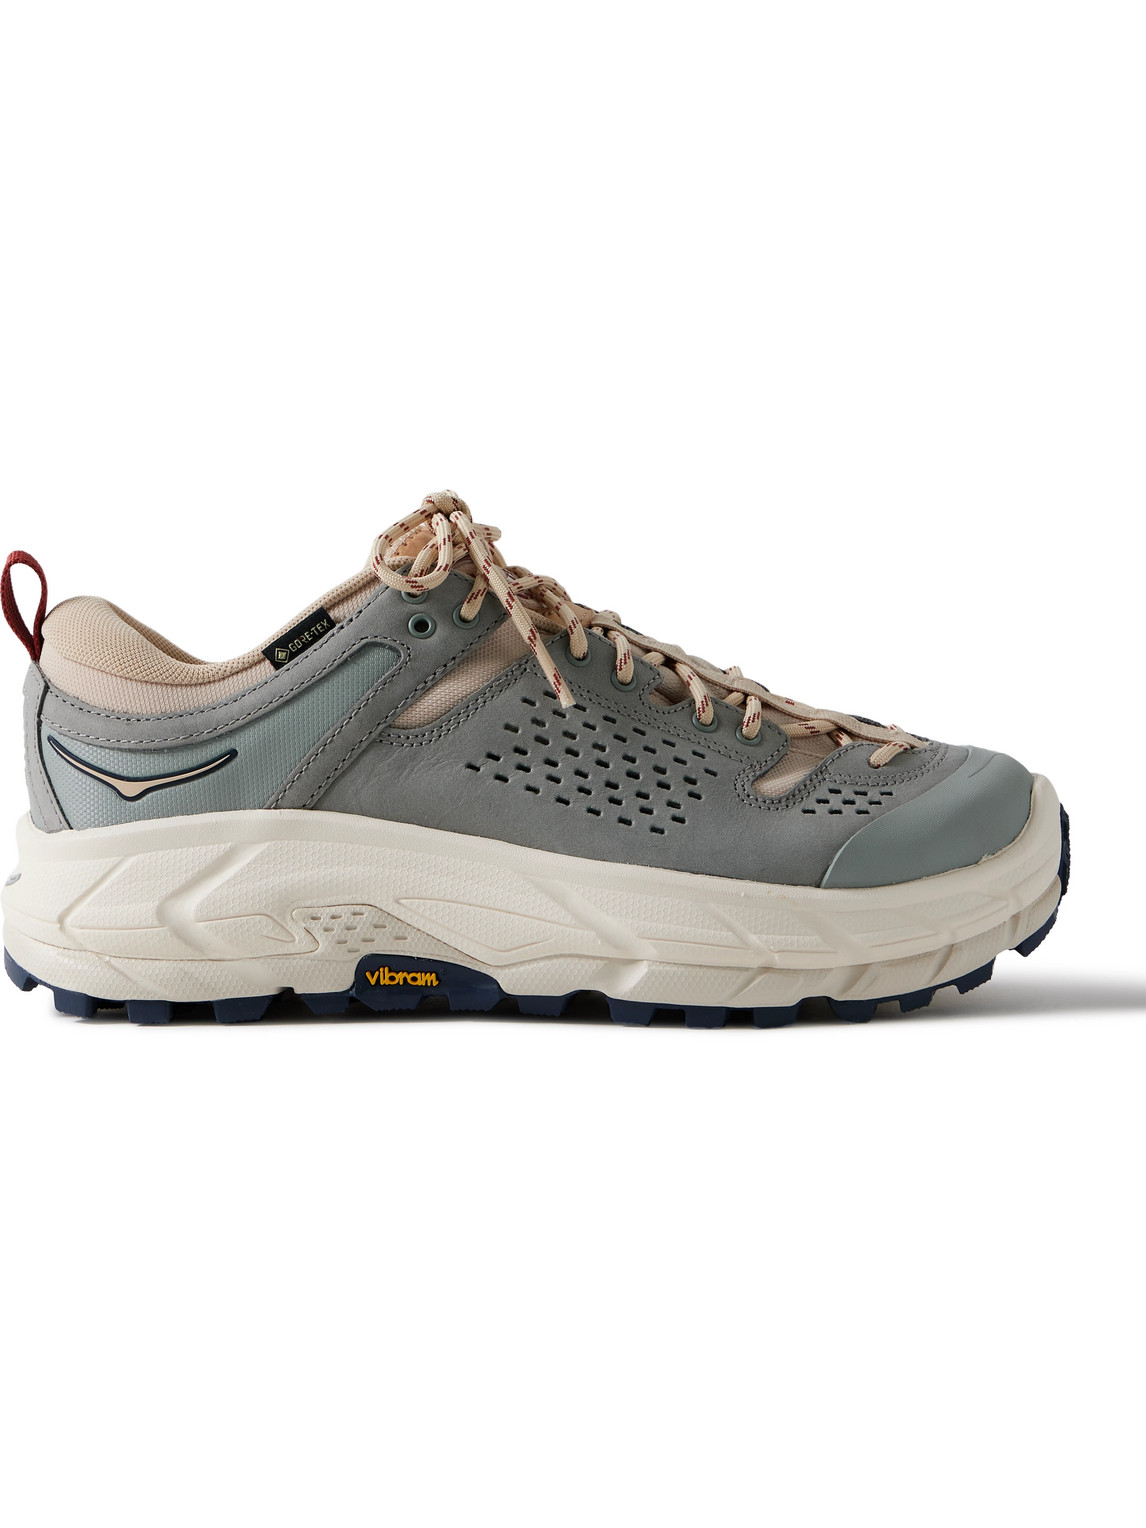 Hoka One One Tor Ultra Lo Rubber-Trimmed Nubuck and GORE-TEX